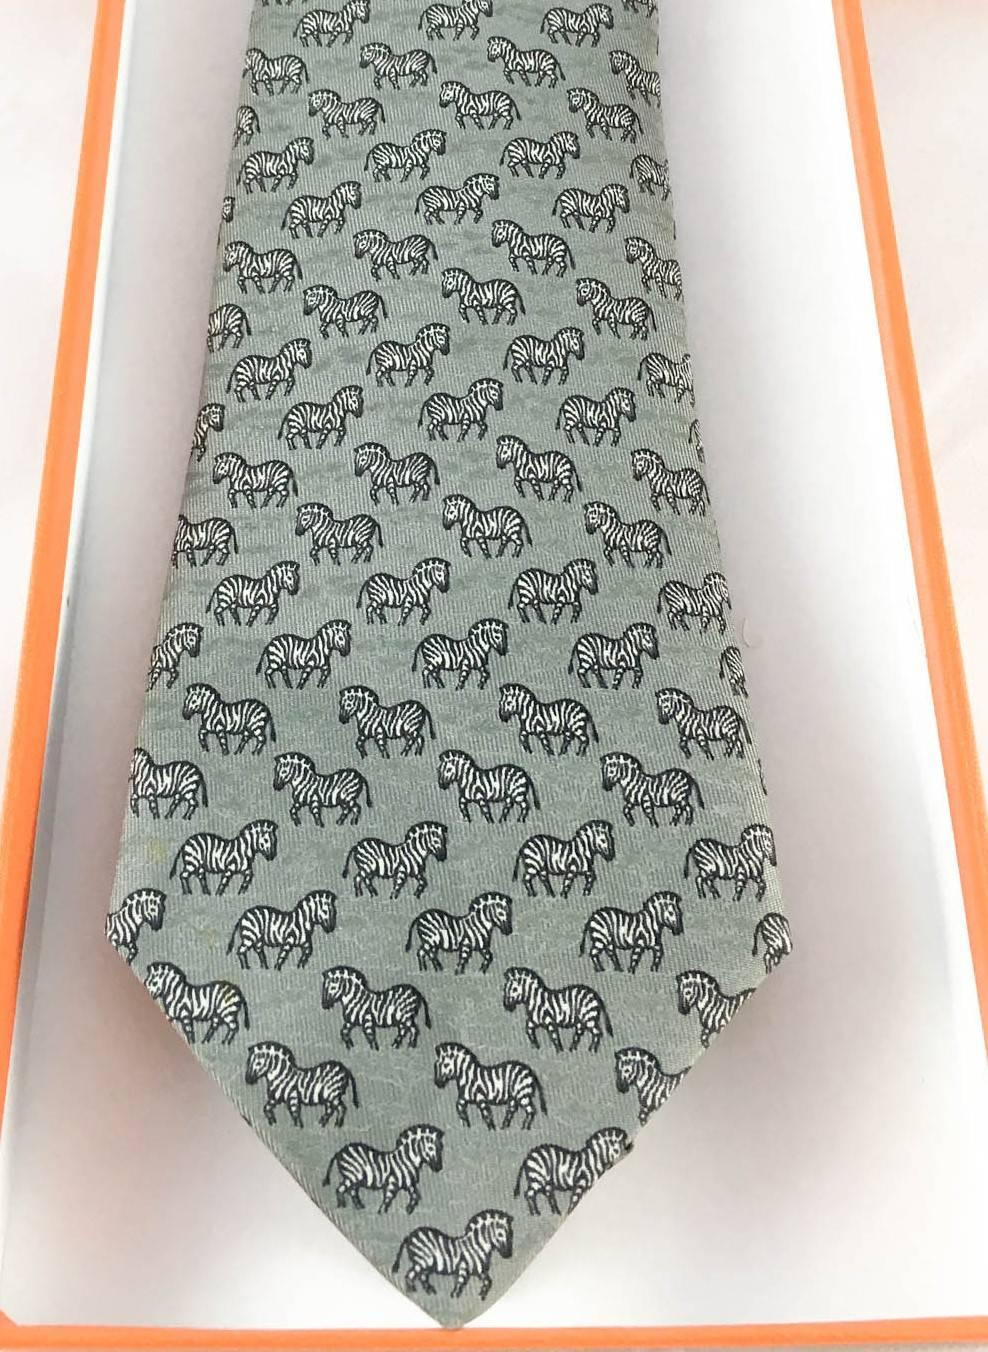 Stylish Hermes Silk Tie. Made in pure silk, this numbered print (7110 OA) in grey features zebras. This is a classy way to some fun to a suit. A quirky and elegant bit of fashion. In the original box.

Label/Designer: Hermes
Period: 21st